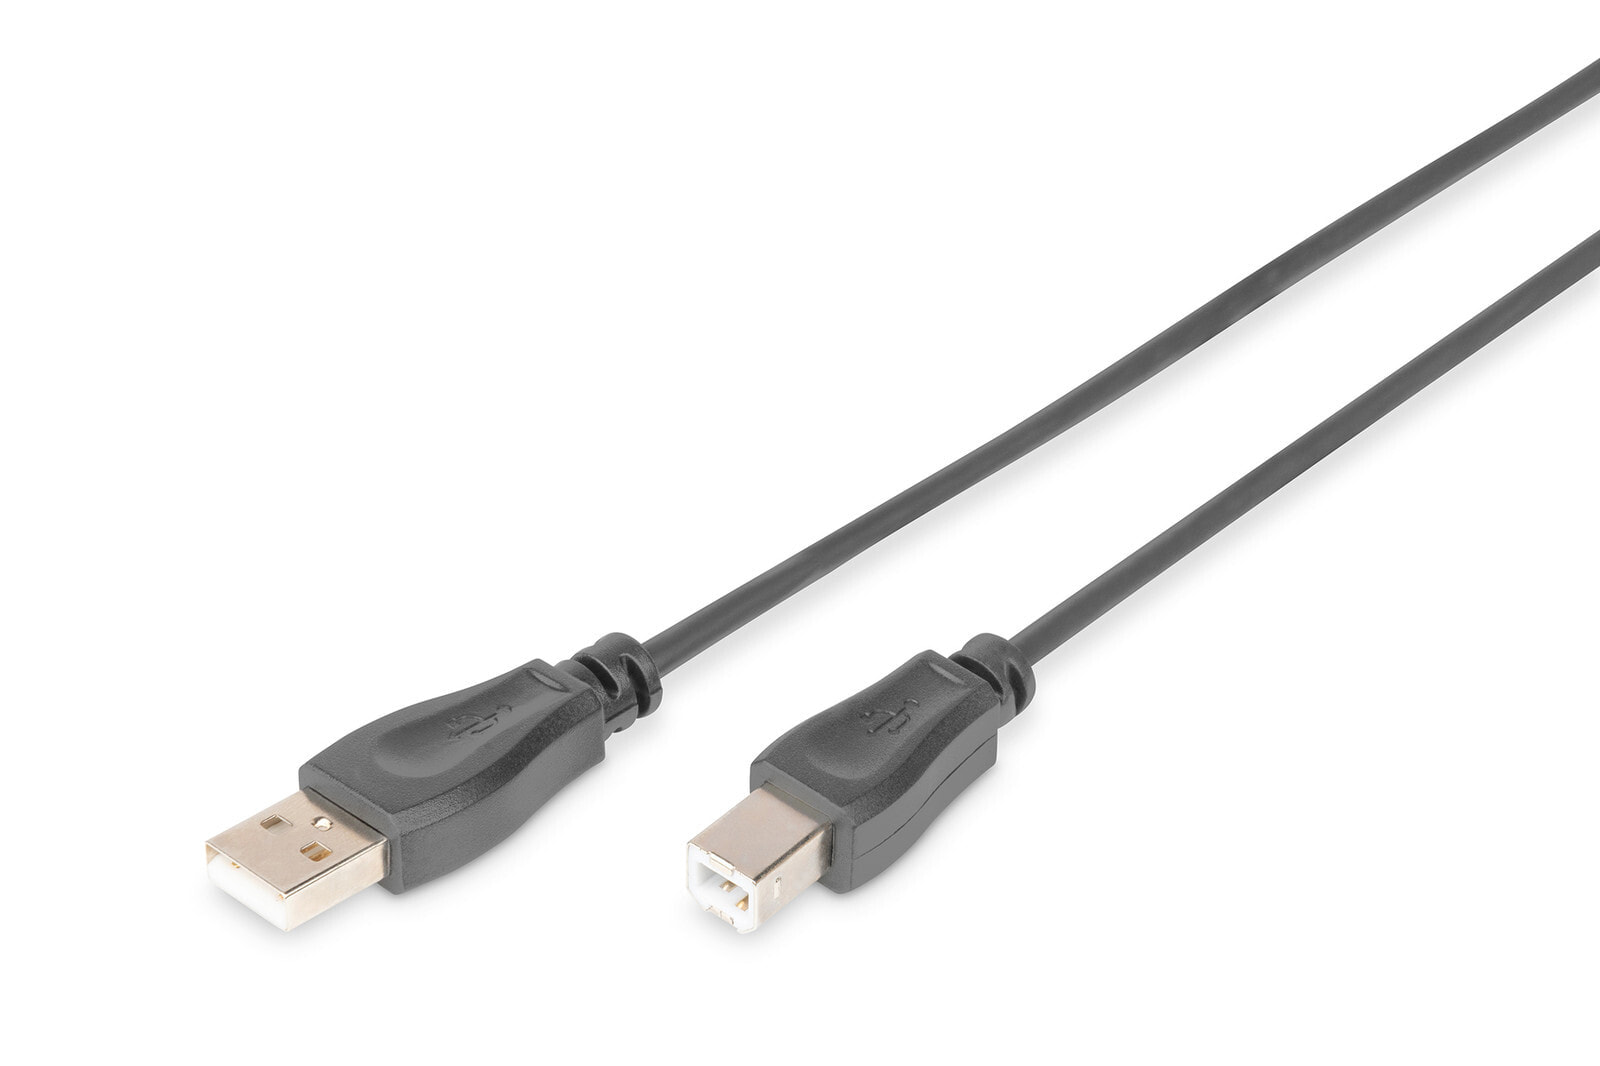 USB 2.0 connection cable, USB A to USB B